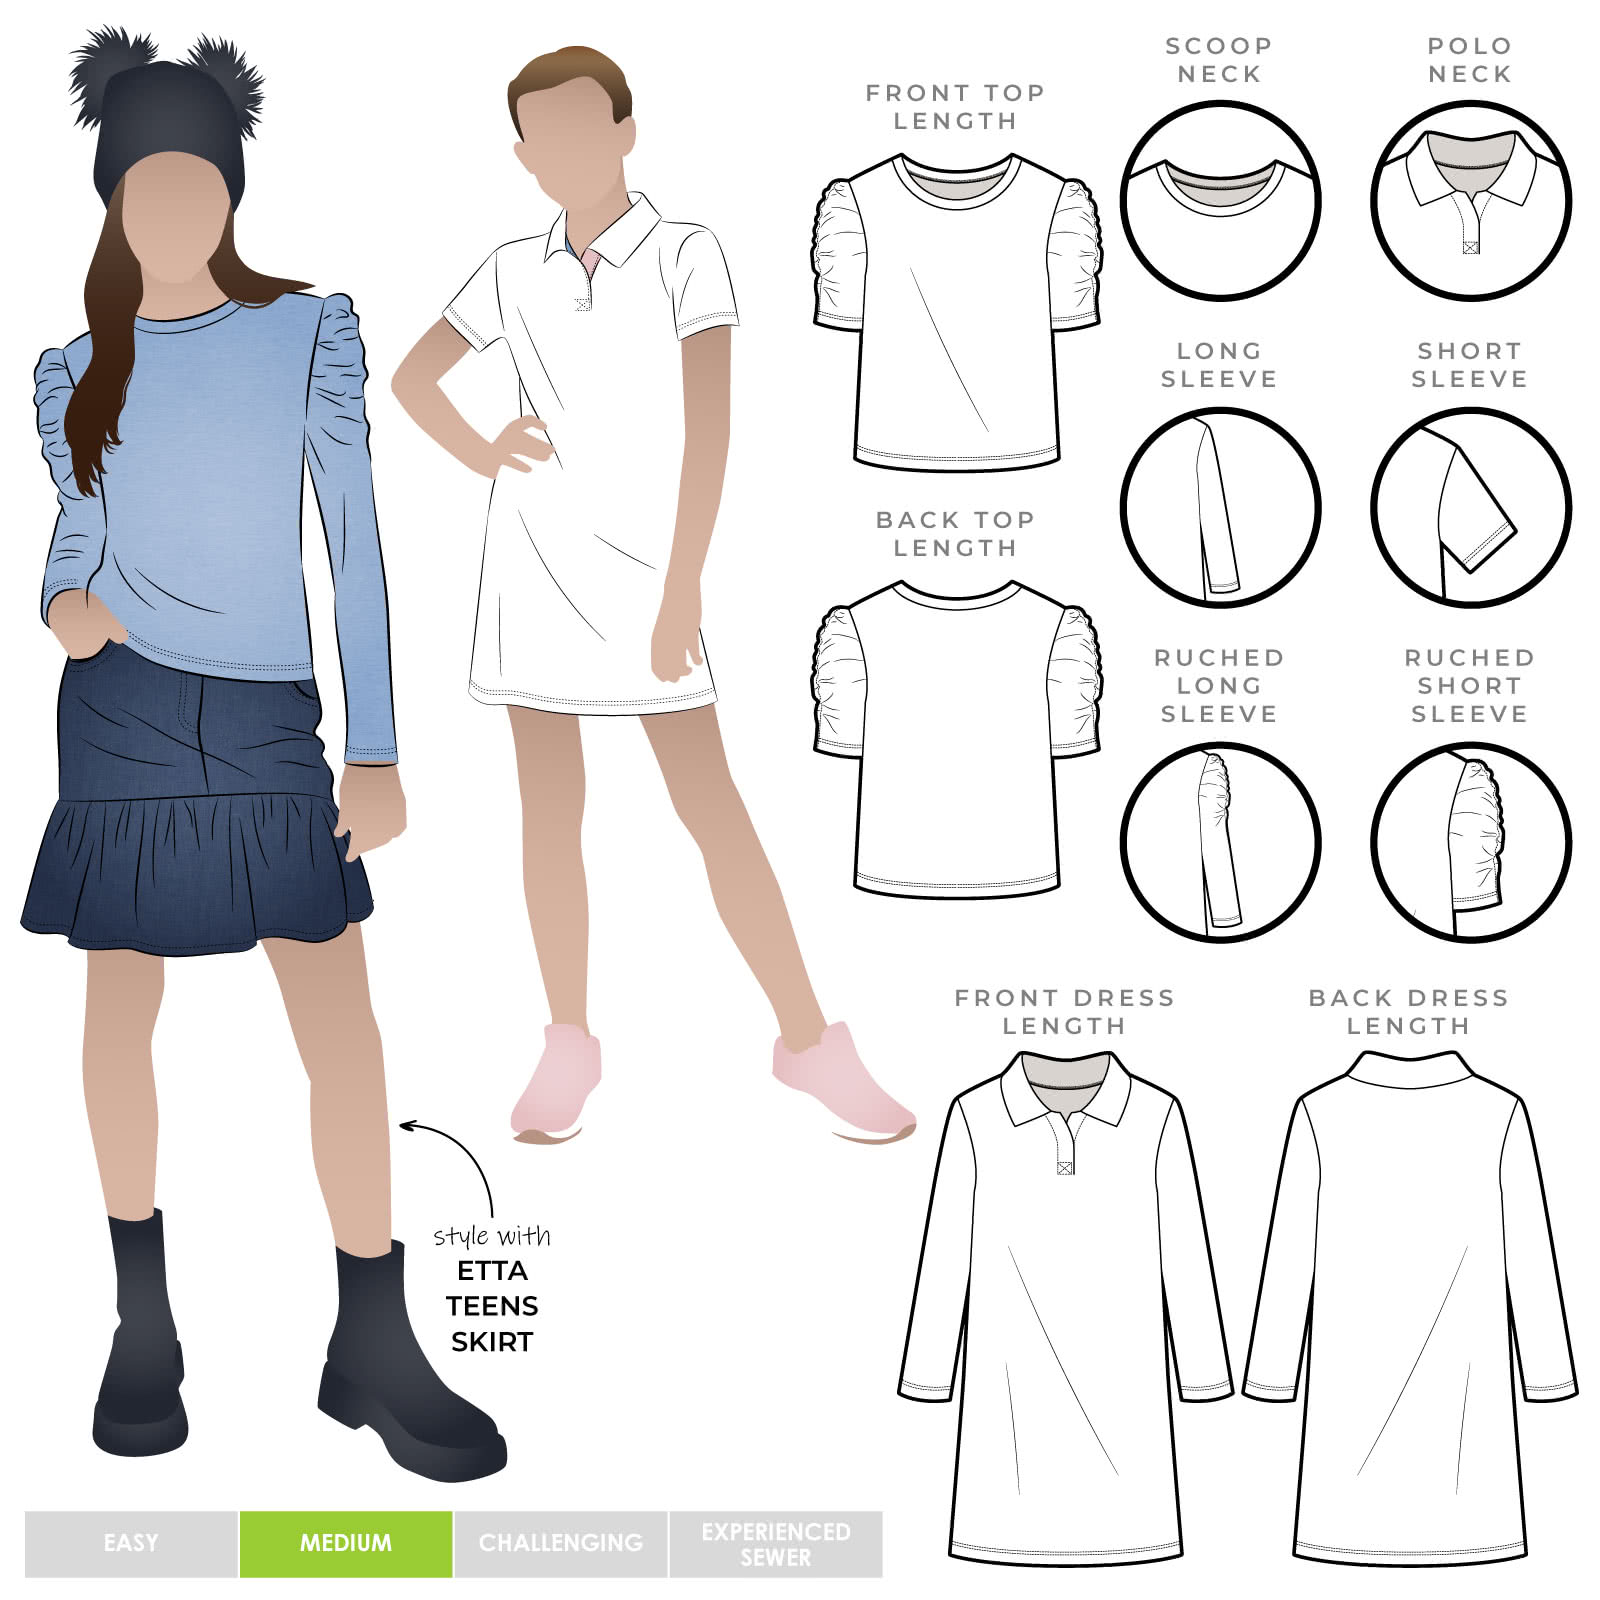 Issy Teens Knit Top Dress By Style Arc - Short swing dress or top option, with optional crew neckline or polo collar option. Short or long sleeve with ruched optional available, for teens 8 - 16